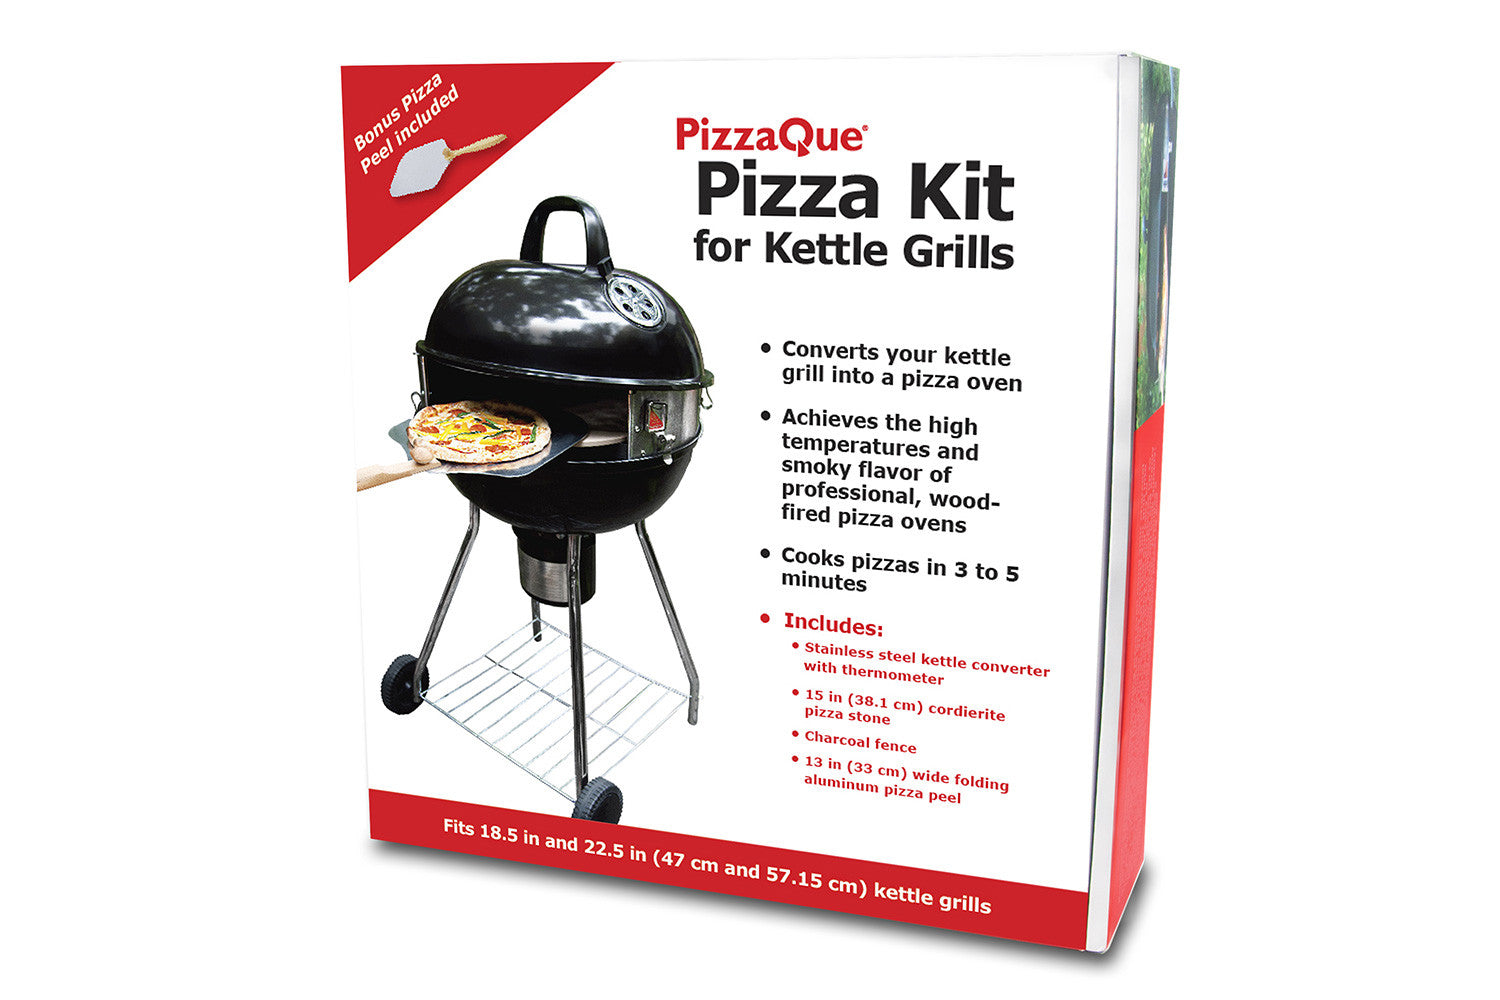 Packaging for the PizzaQue Pizza Kit for Kettle Grills